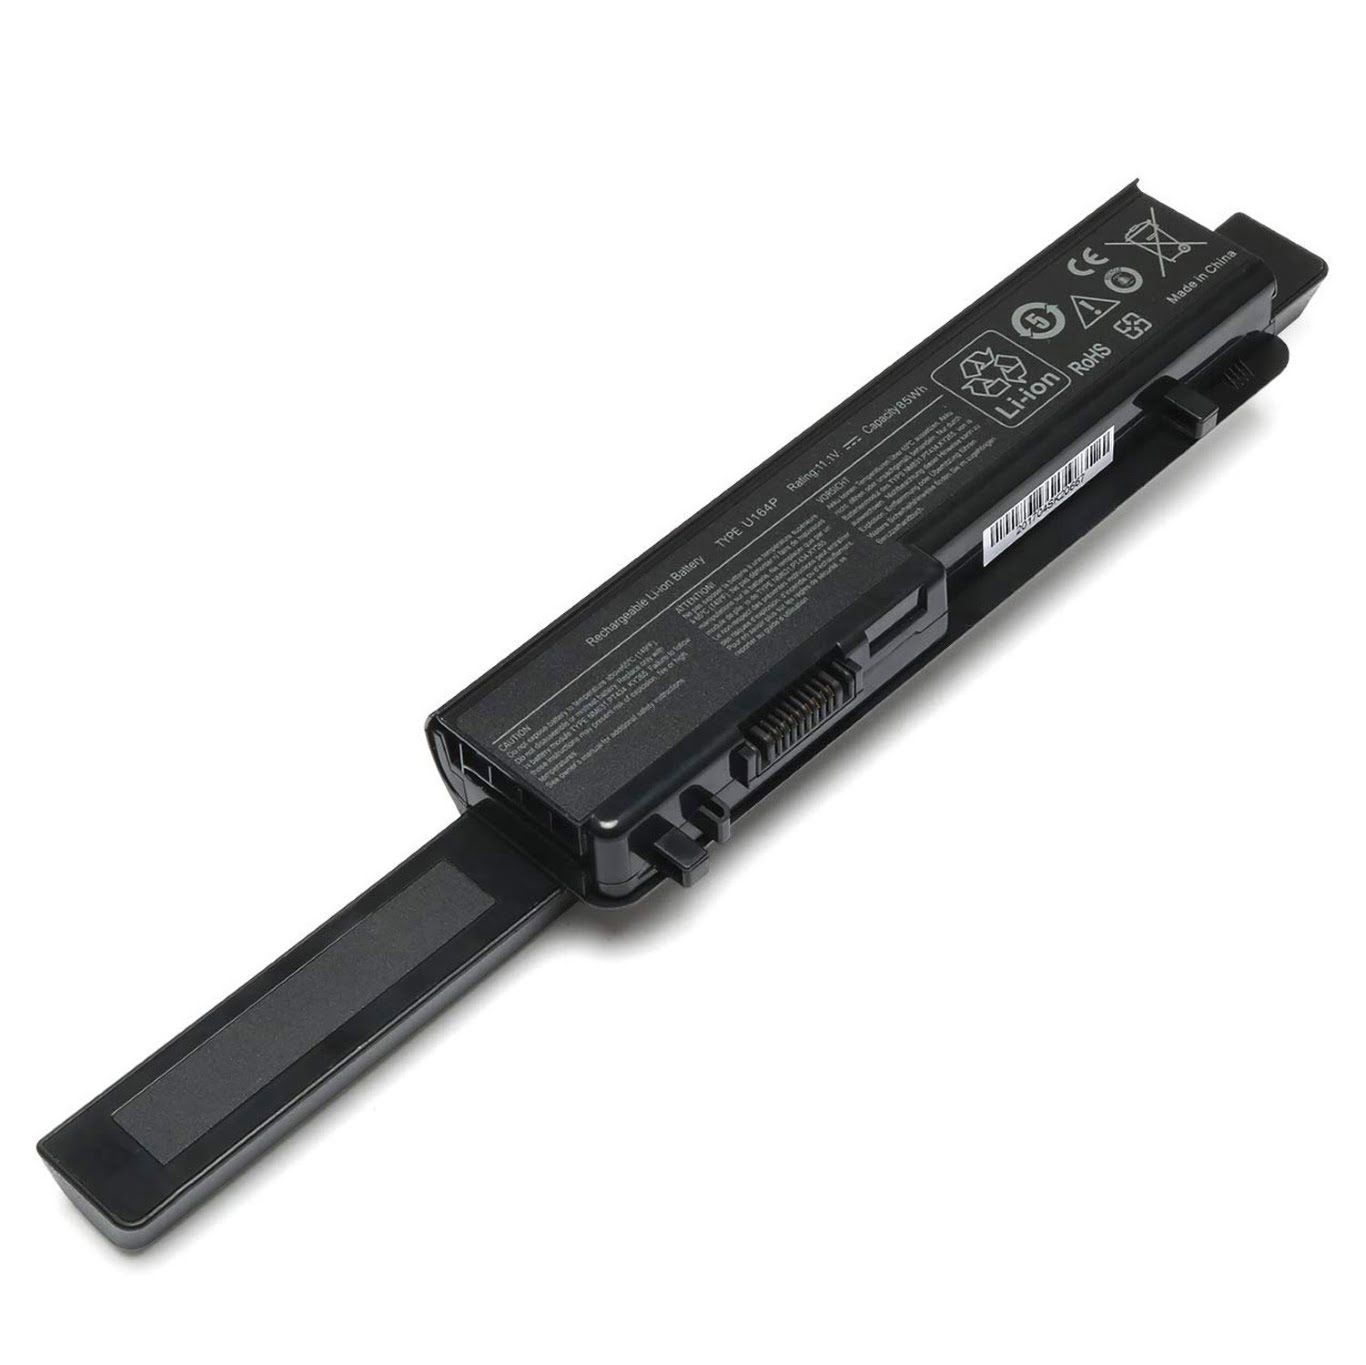 0W077P, 312-0186 replacement Laptop Battery for Dell Studio 17, Studio 1745, 9 cells, 11.1V, 6600mAh